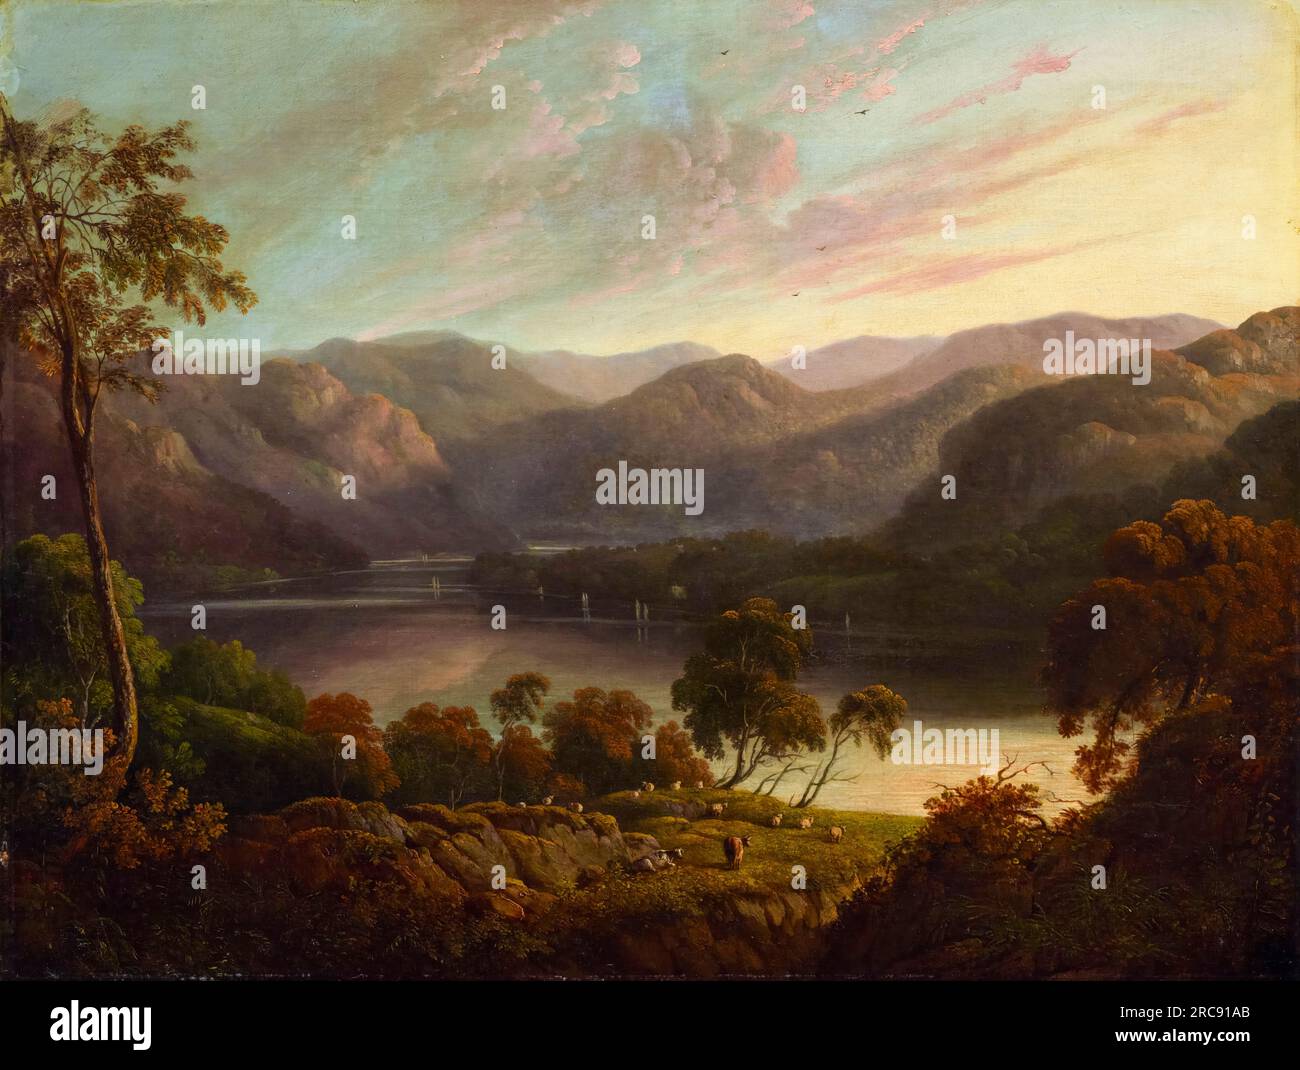 John Glover, Landscape view in Cumberland, painting in oil on canvas, circa 1820 Stock Photo